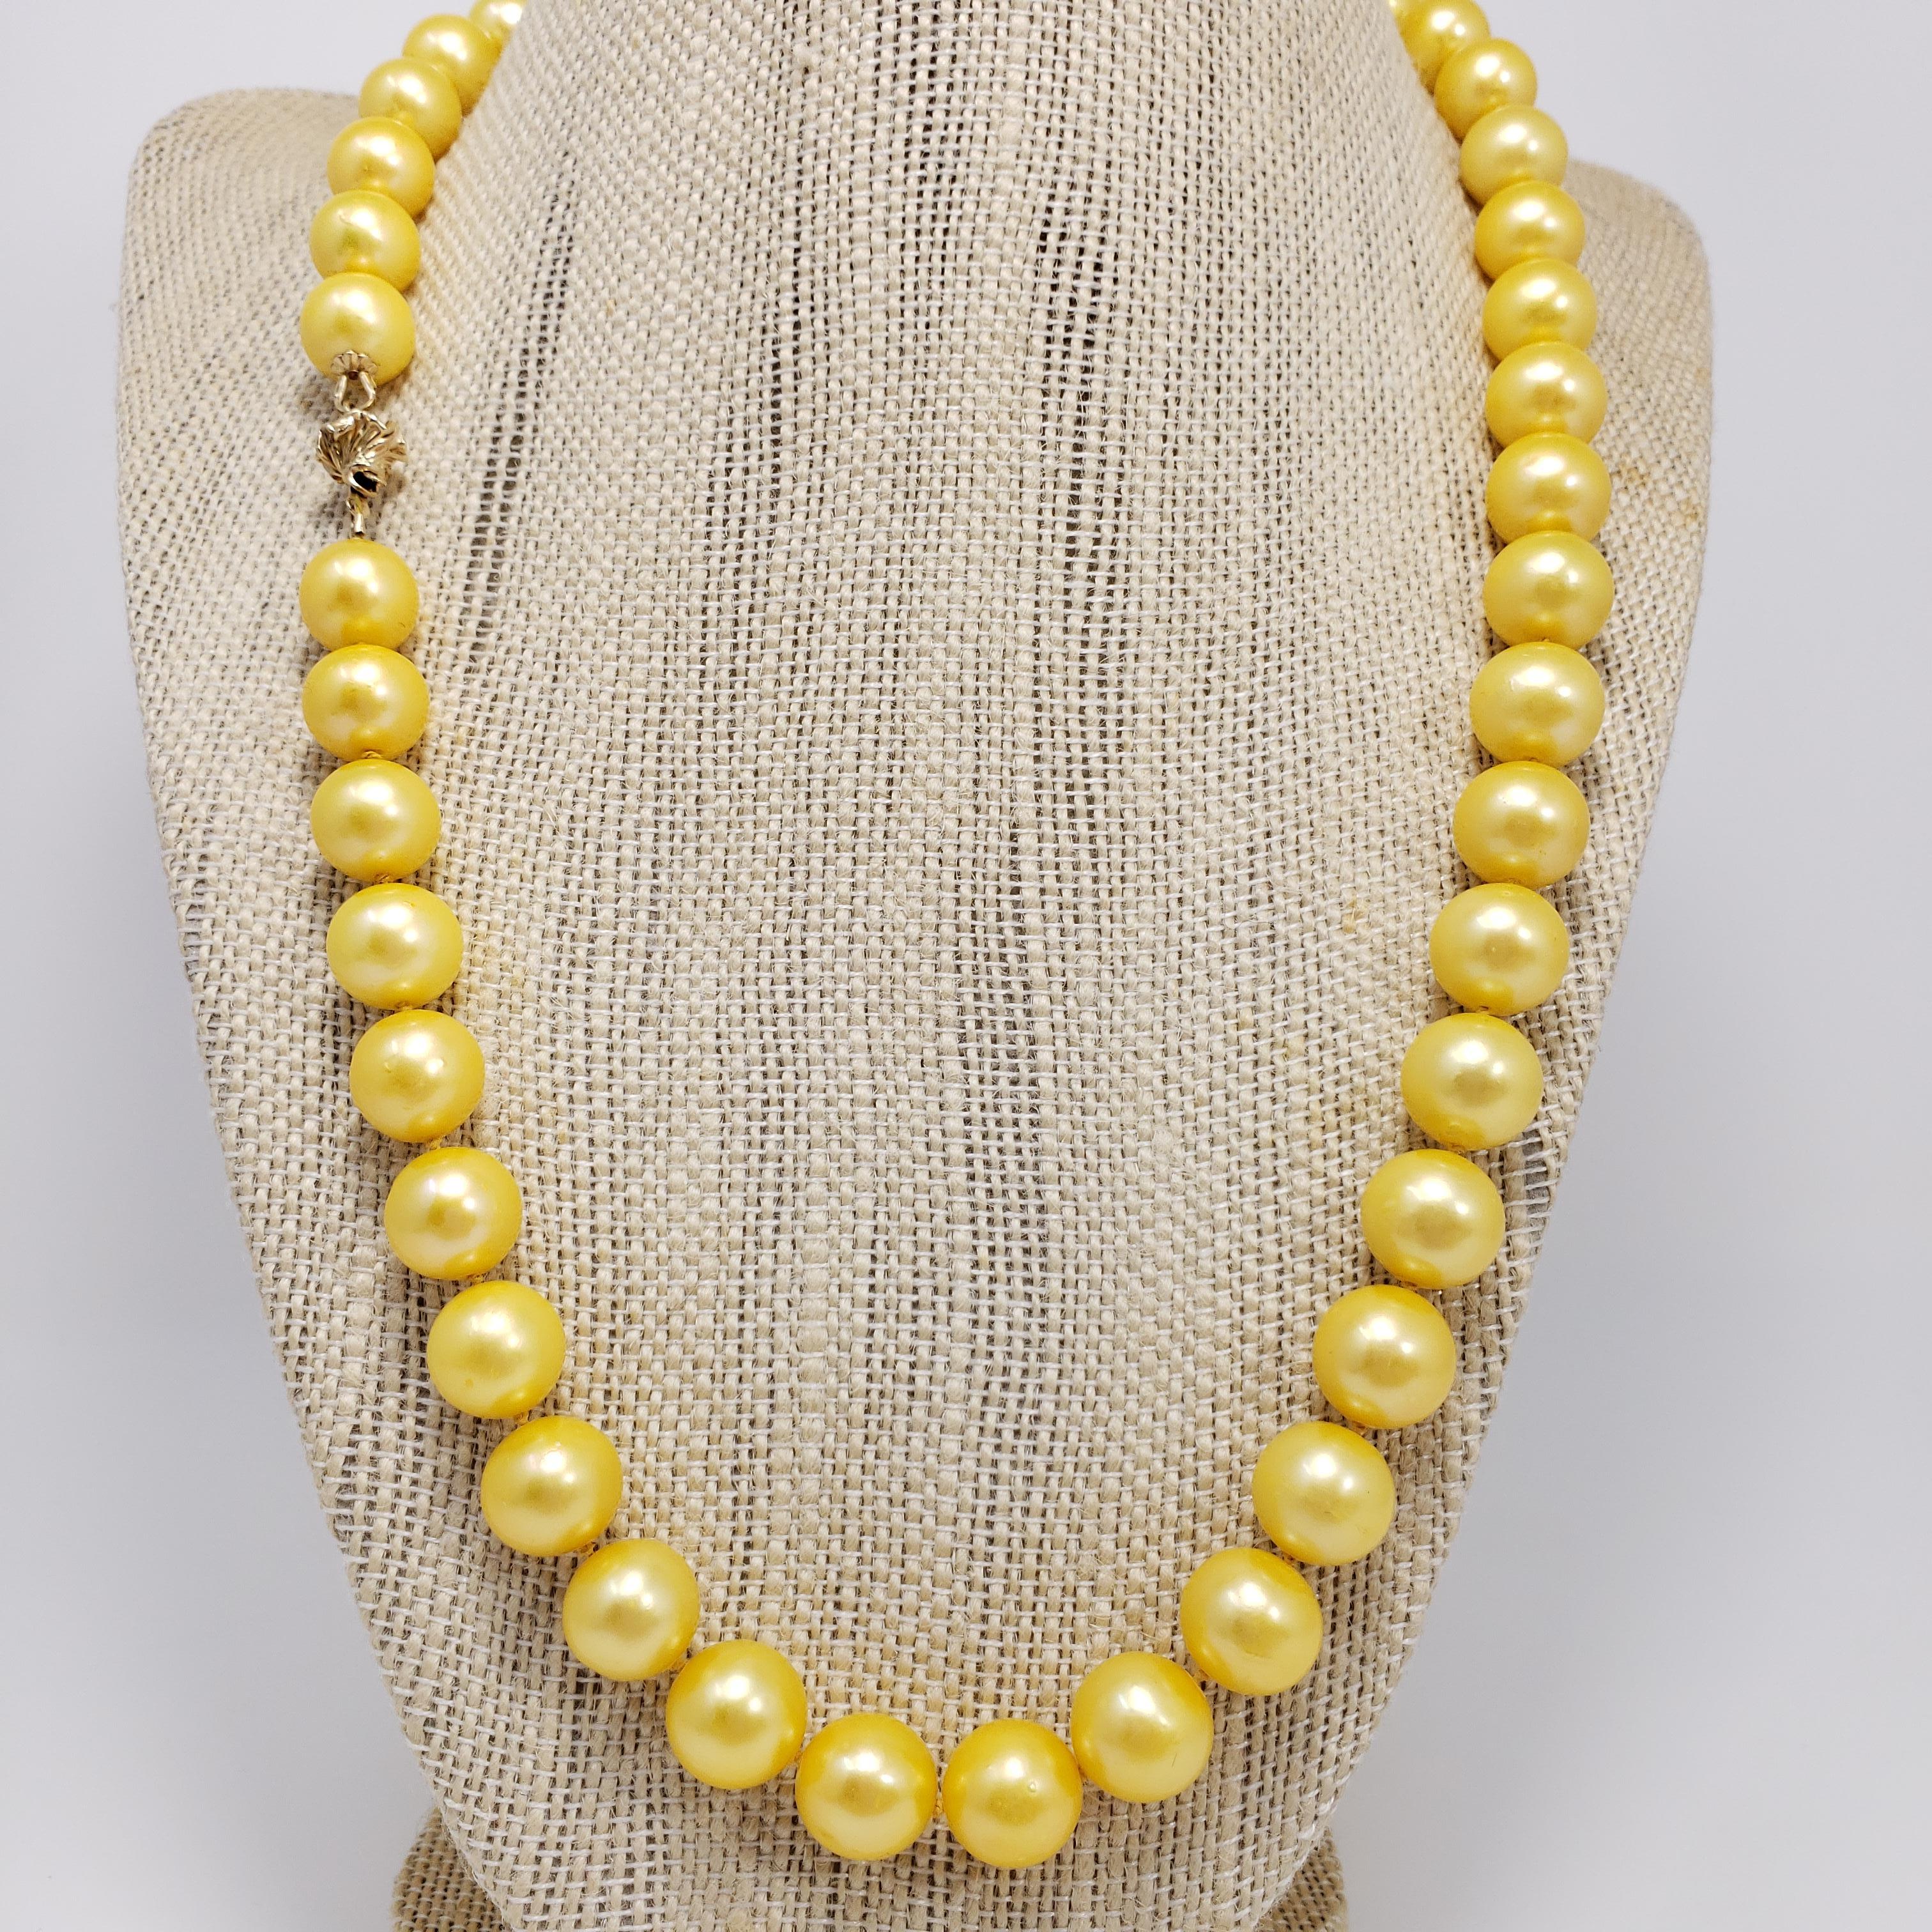 An exquisite necklace that features 10.5mm glowing golden South Sea pearls on a hand knotted silk string. Fastened with 14K yellow gold garlic clasp. A luxurious accessory perfect for any style!

Hallmarks: 585